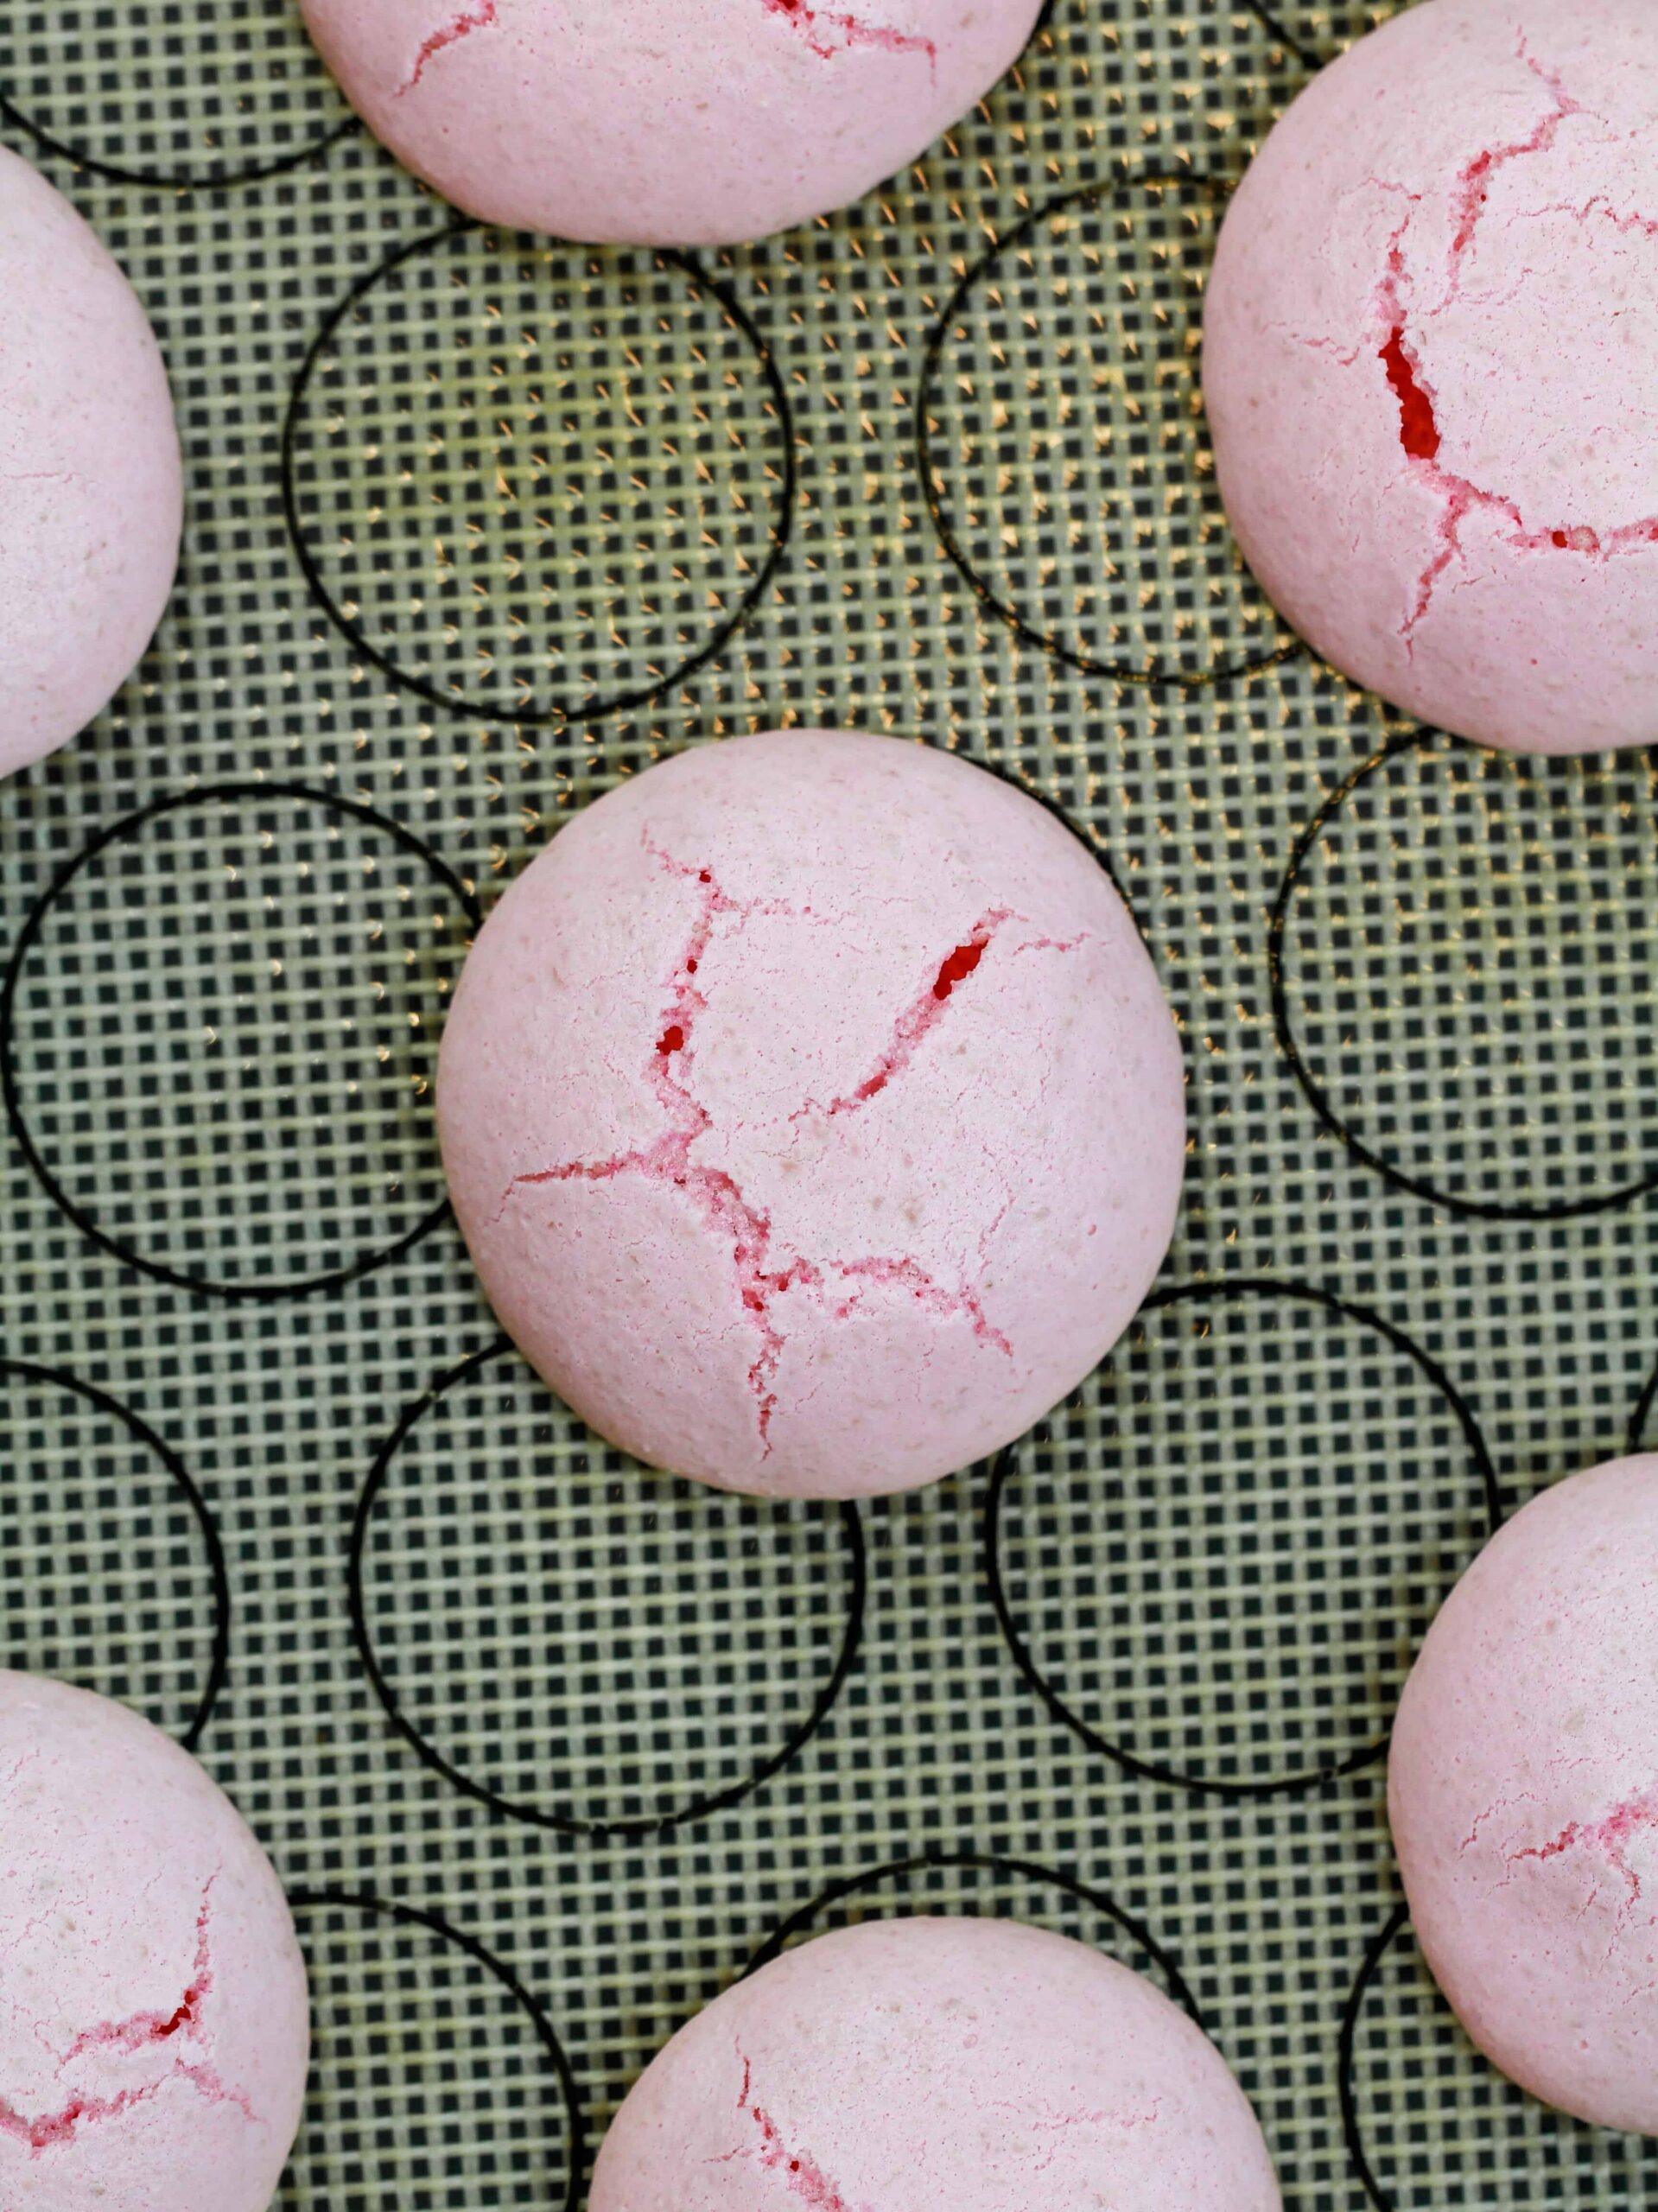 image of cracked italian macarons that were baked in too hot of an oven included in a macaron troubleshooting guide explaining how to avoid this issue